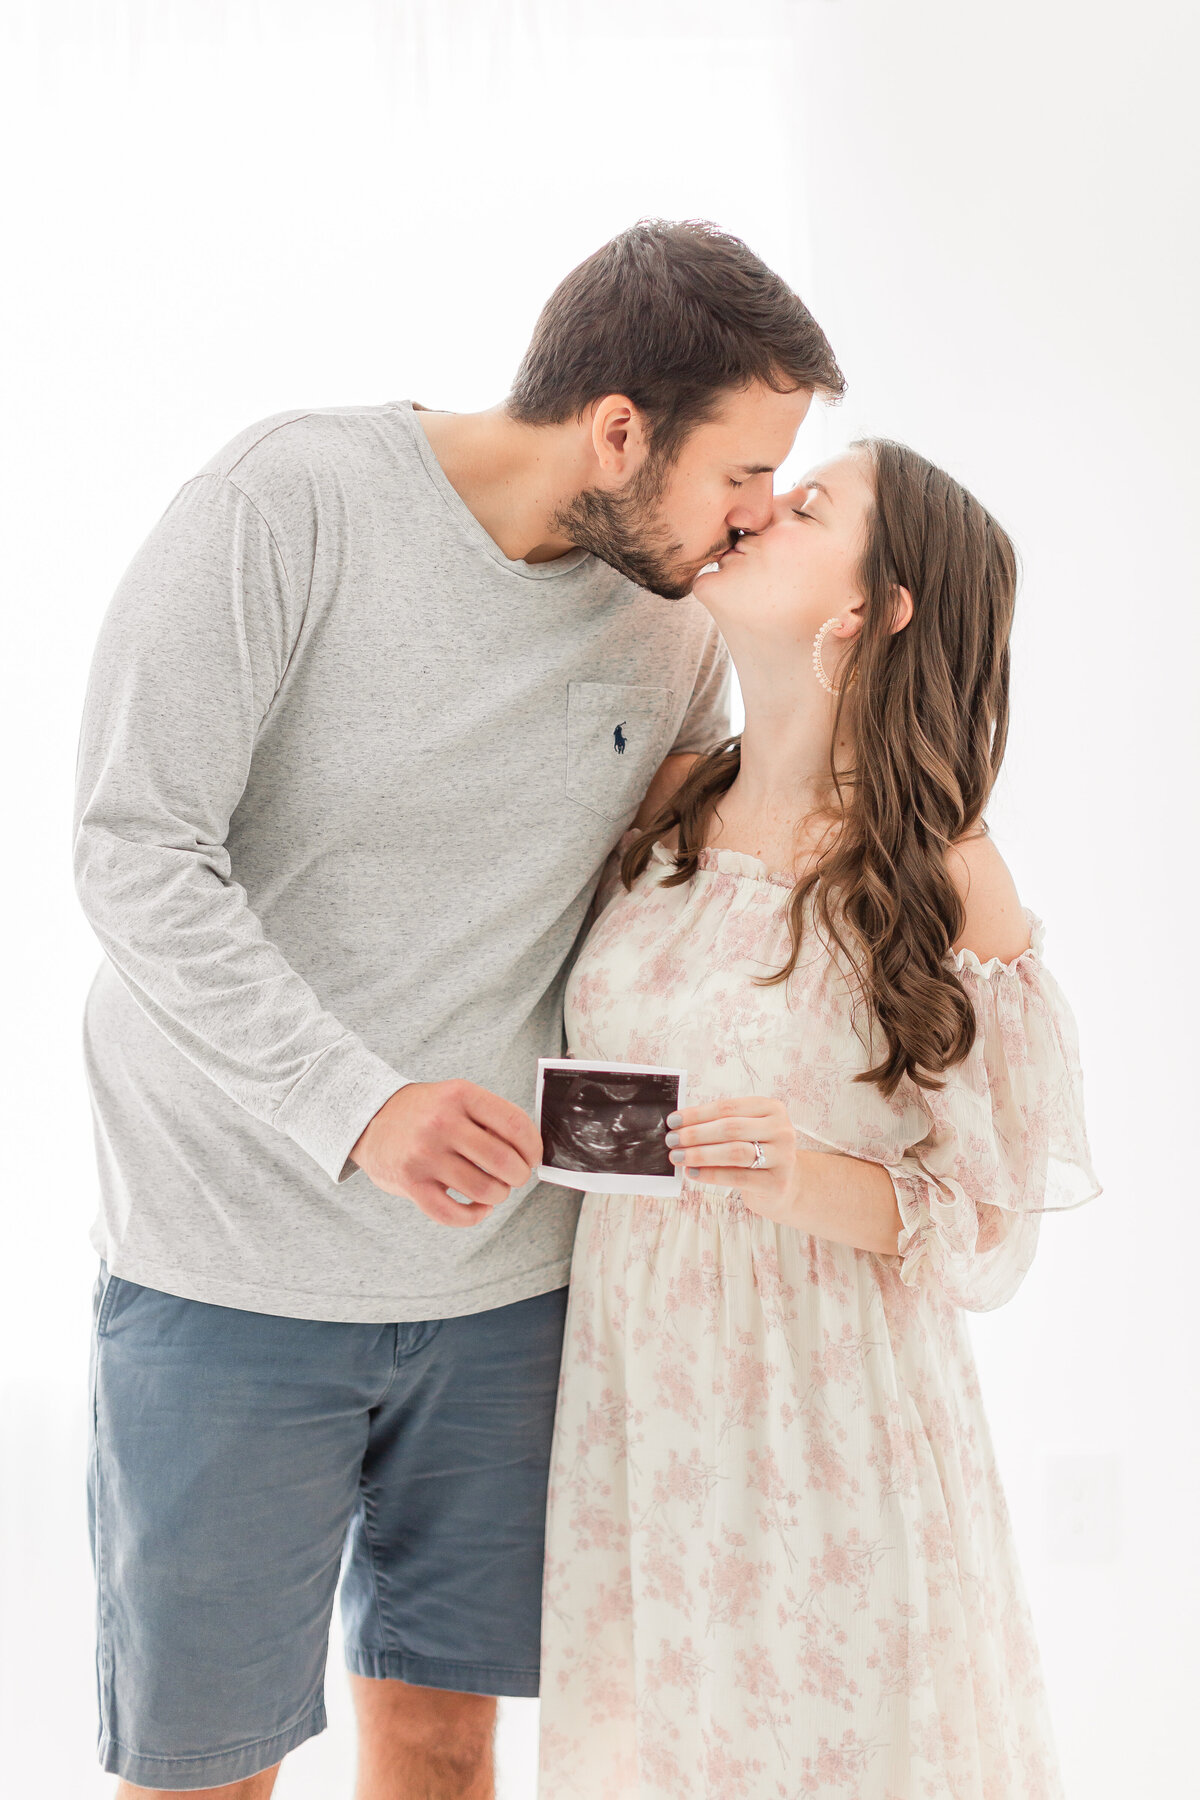 A pregnancy announcement photo of a couple kissing while holding a sonogram in front of a window by Northern Virginia maternity photographer